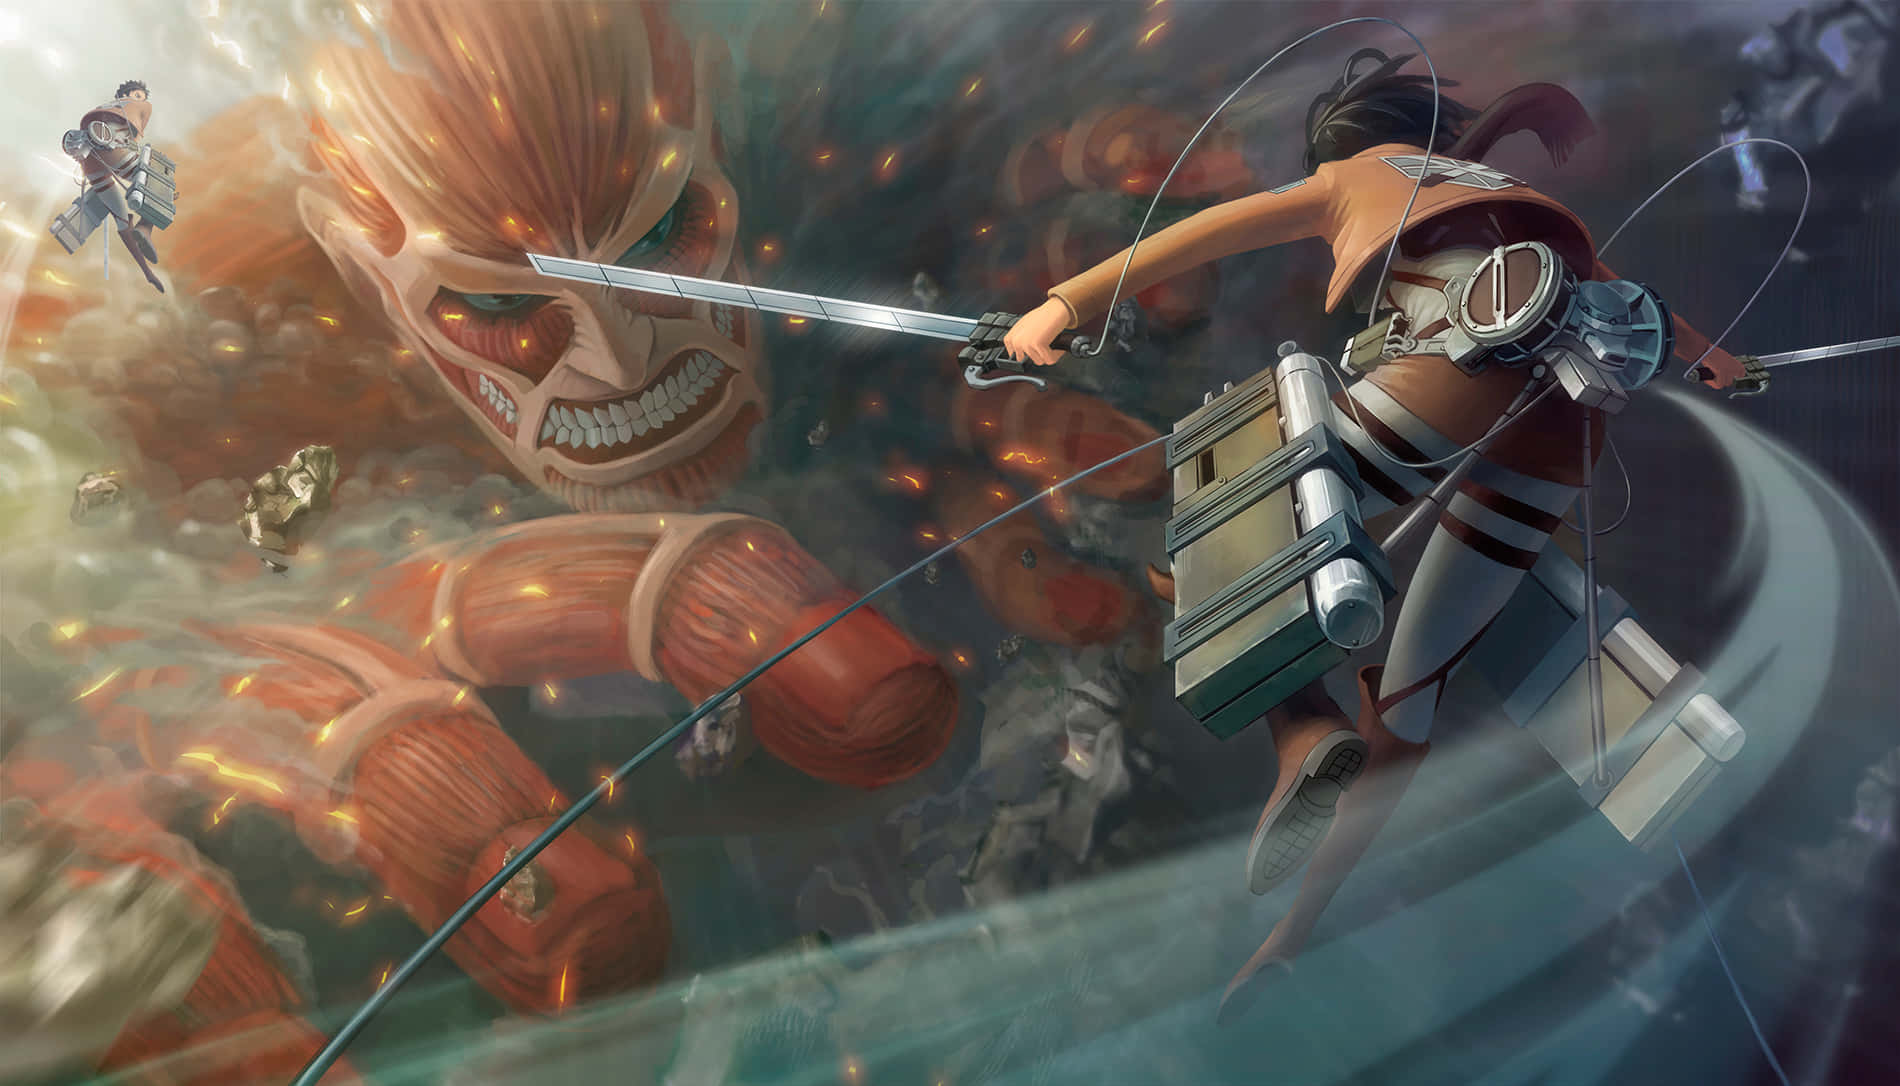 Prepare To Battle Like Never Before In Attack On Titan Video Game. Wallpaper